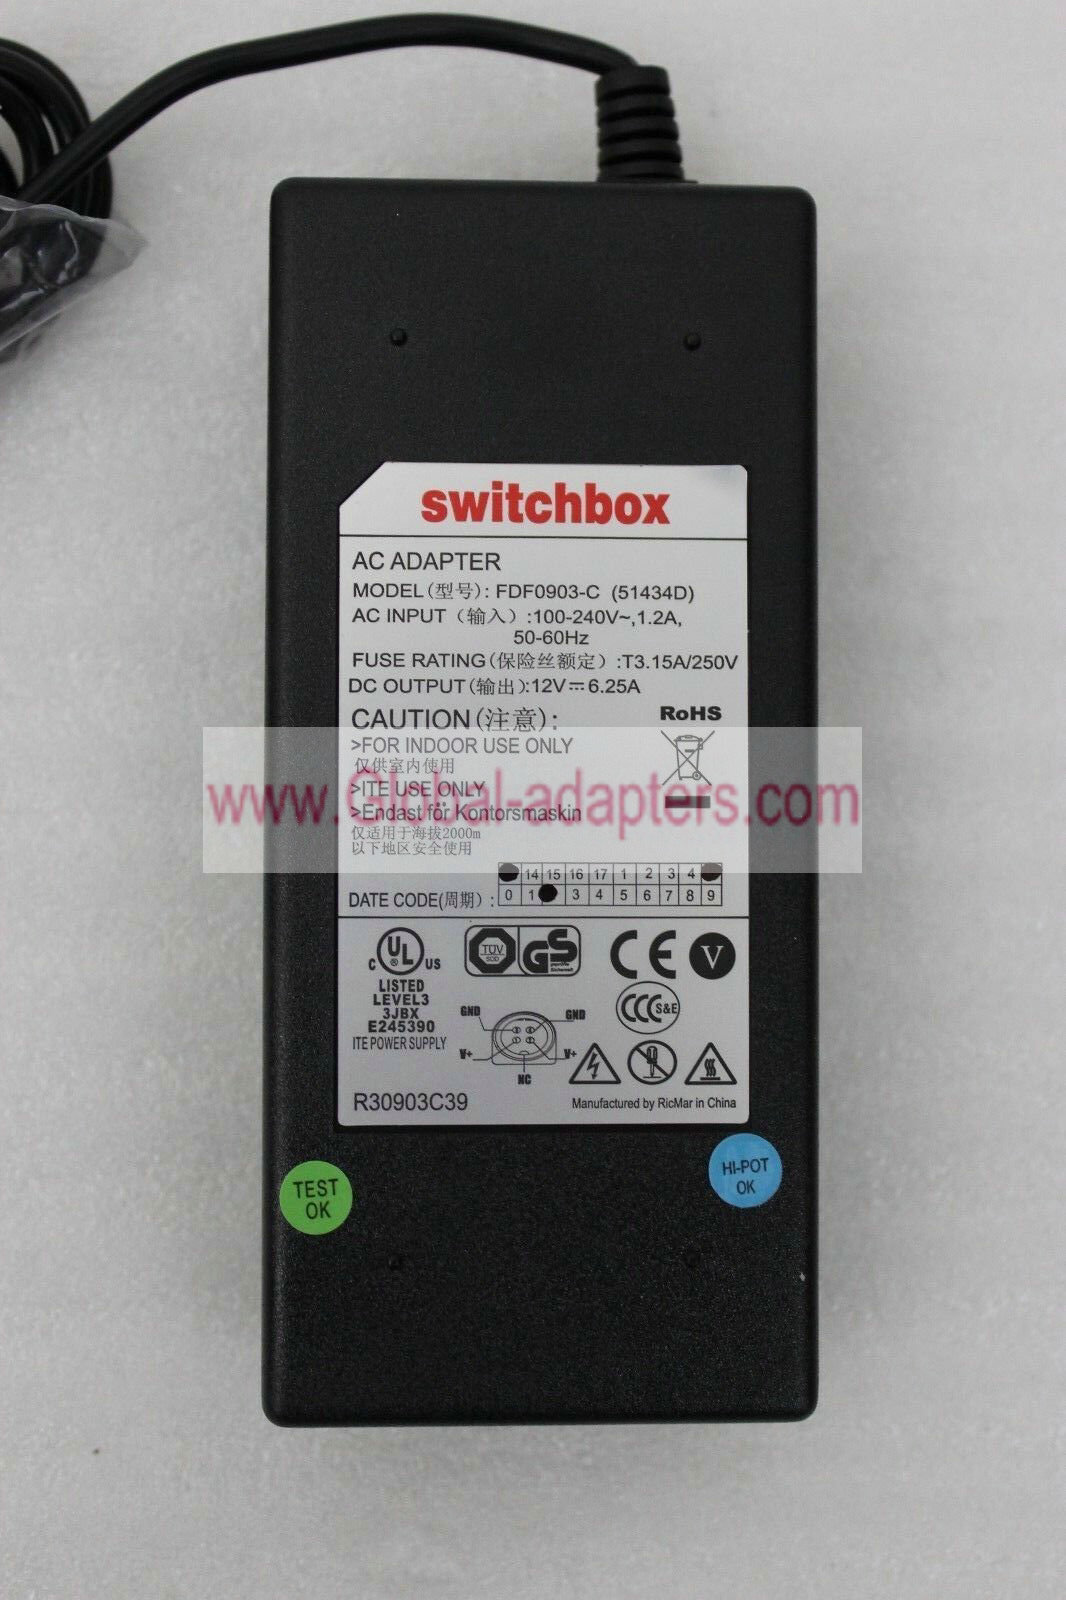 New Switchbox AC Adapter FDF0903-C(51434D) 12V 6.25A POWER SUPPLY 4PIN